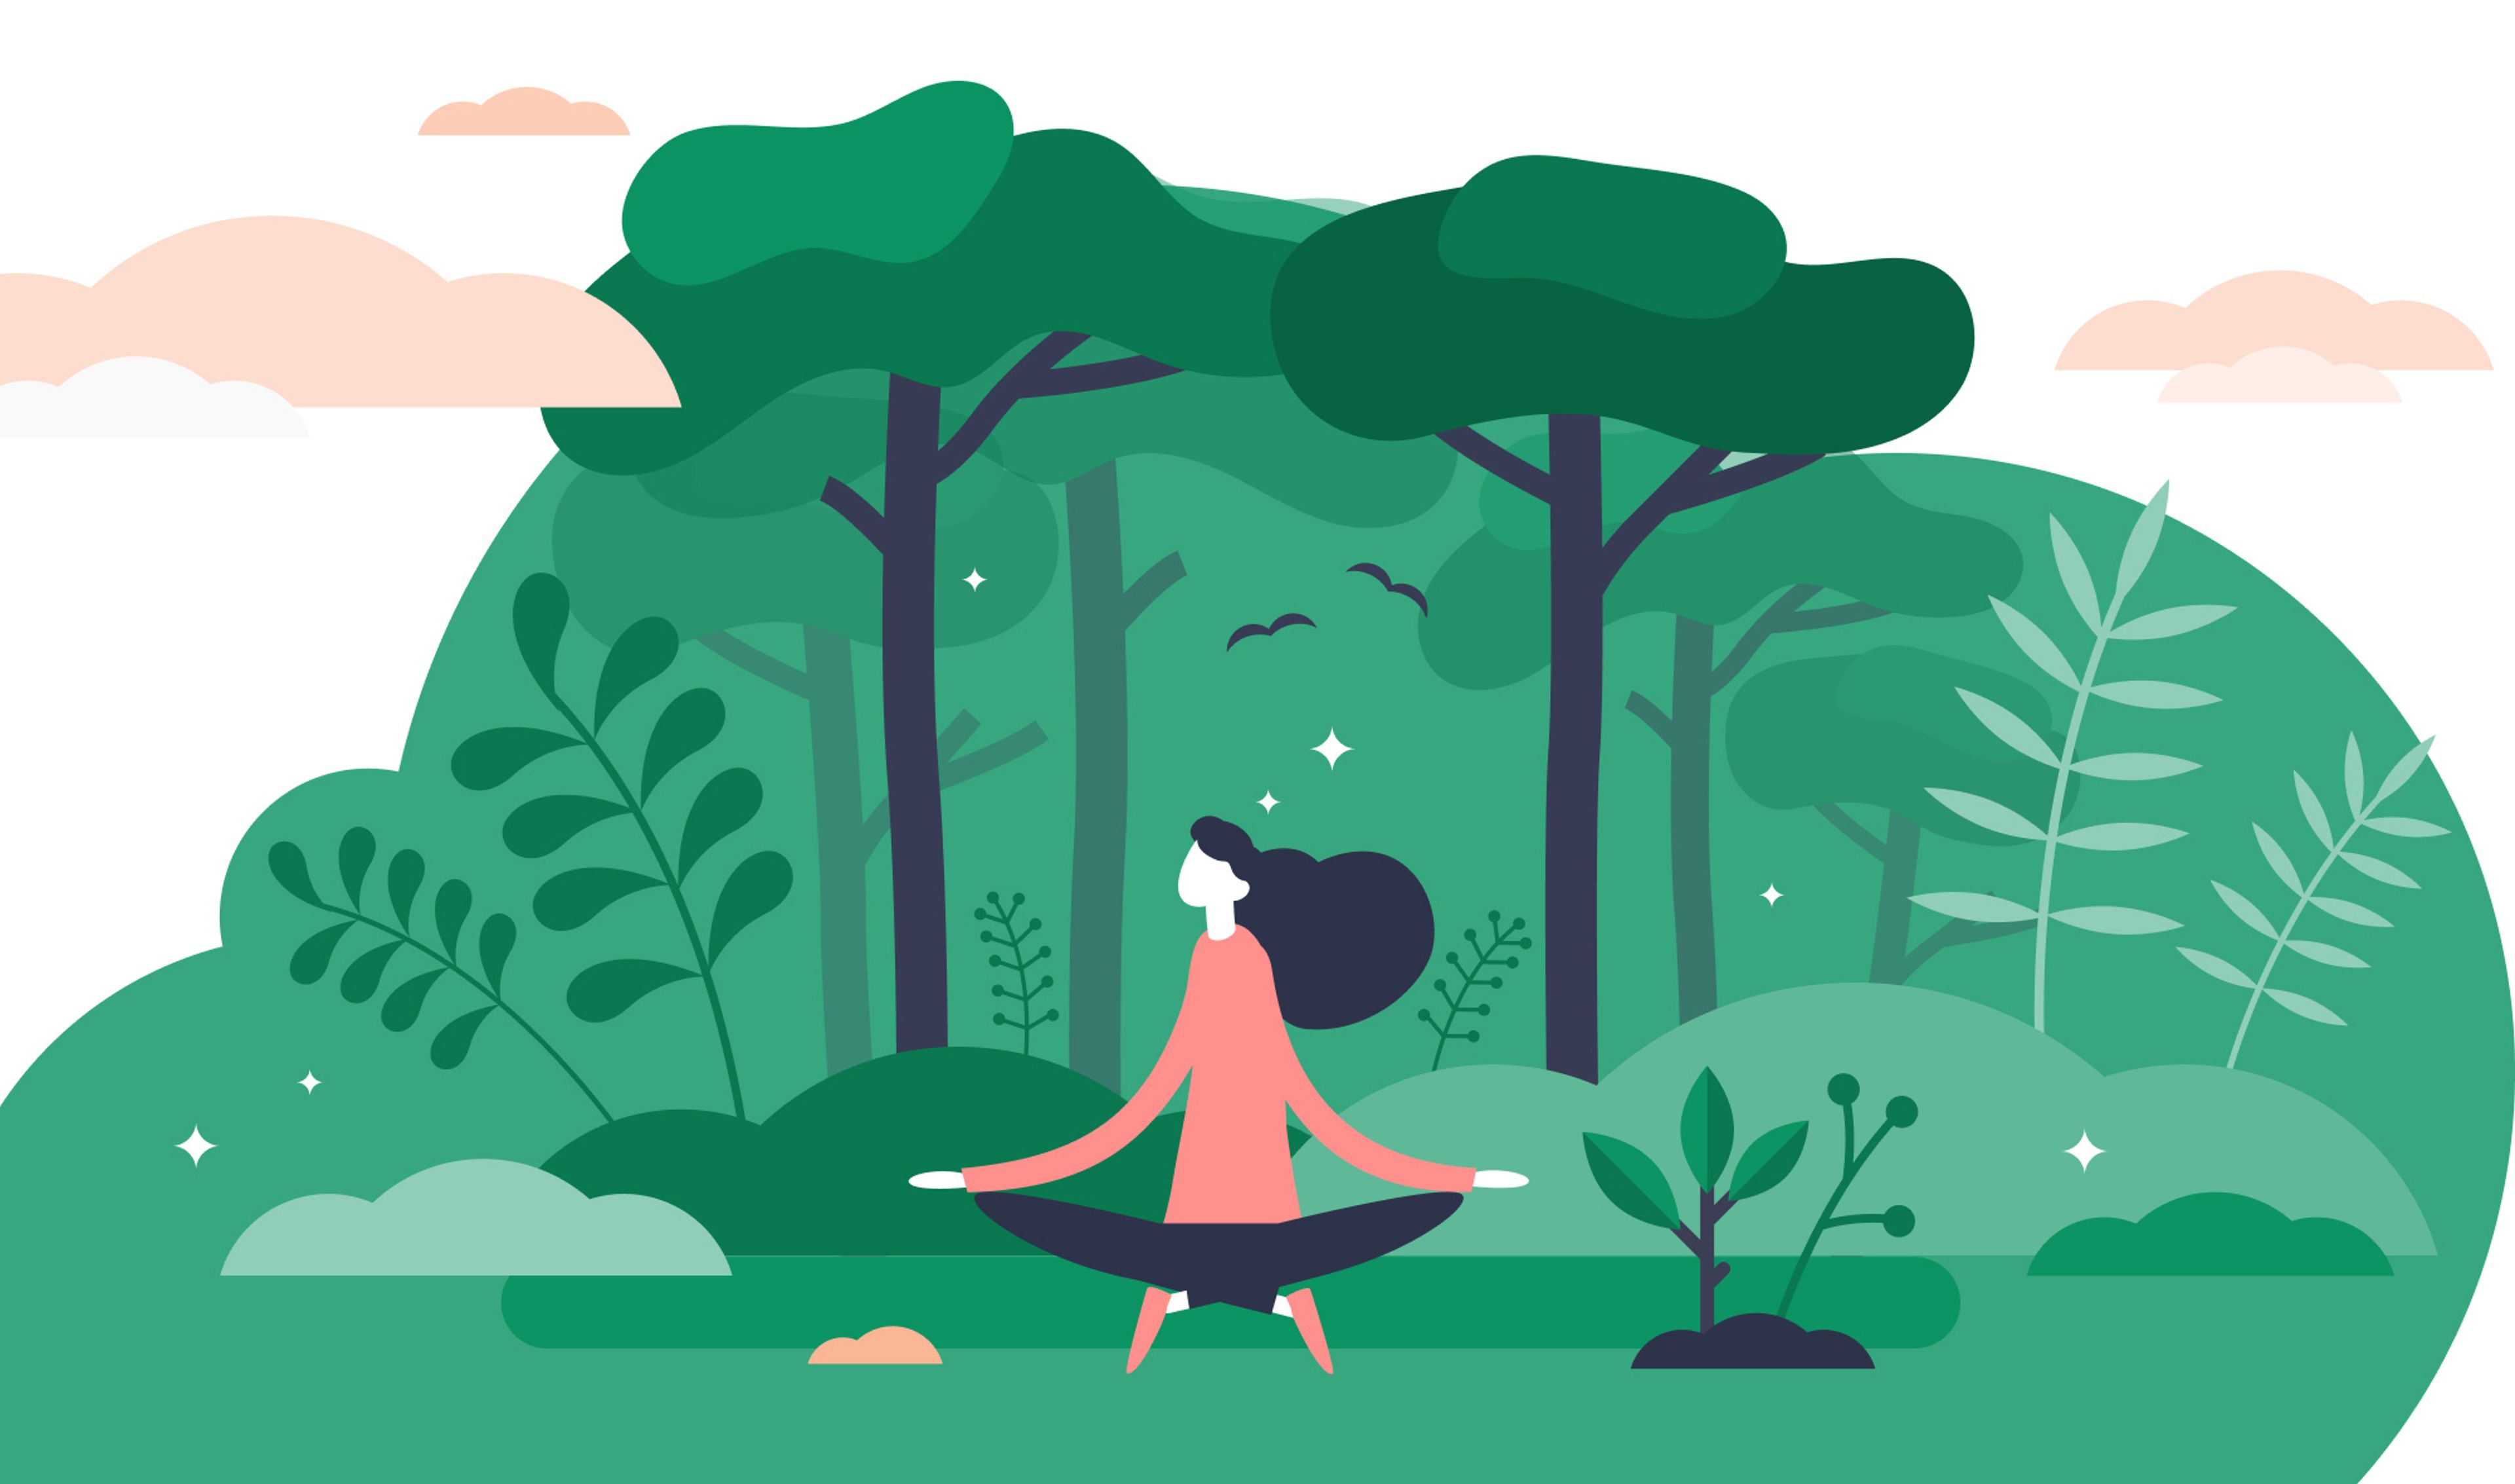 Nature therapy explained: types, benefits, and DIY tips